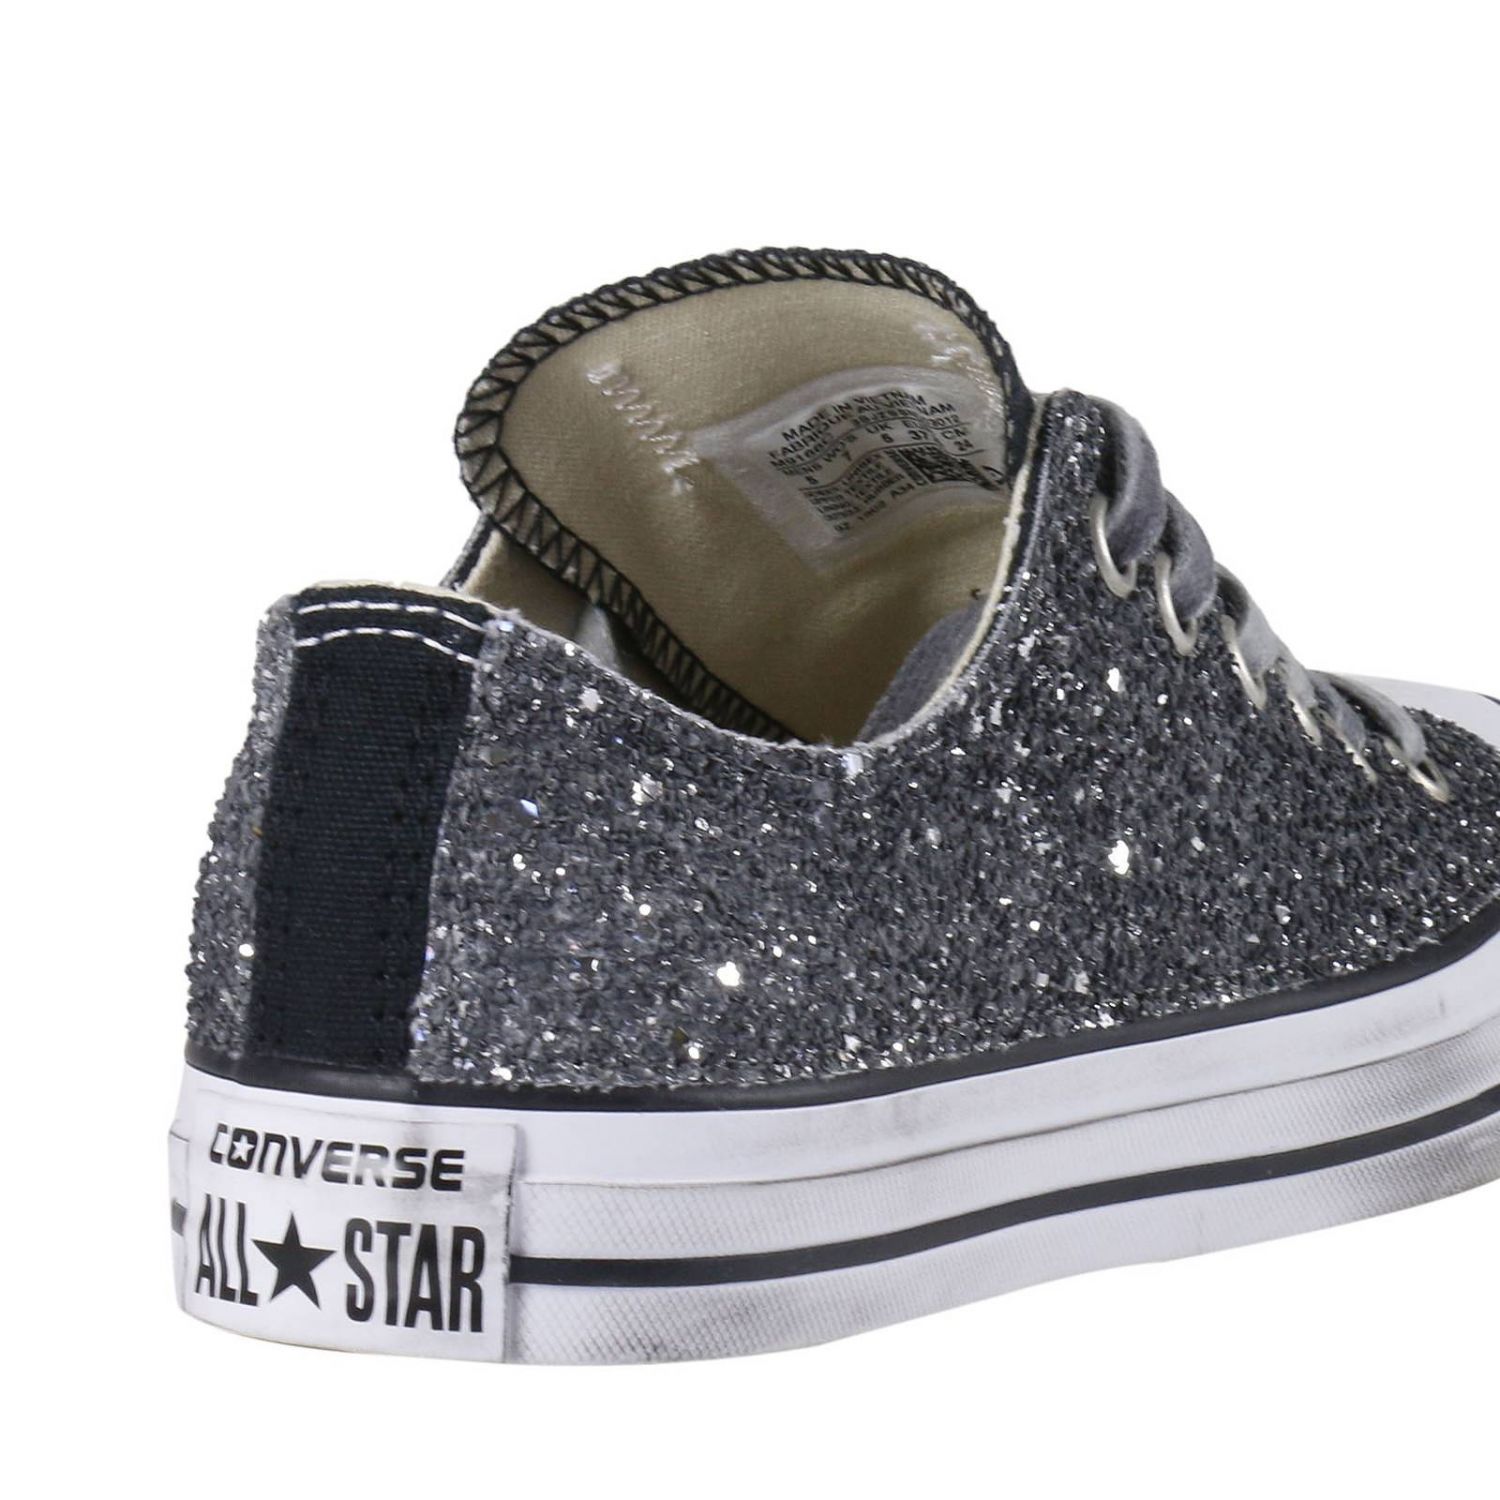 Sneaker All Star Limited Edition in canvas con glitter | Sneakers Converse  Limited Edition Donna Argento | Sneakers Converse Limited Edition 156907C  Giglio IT